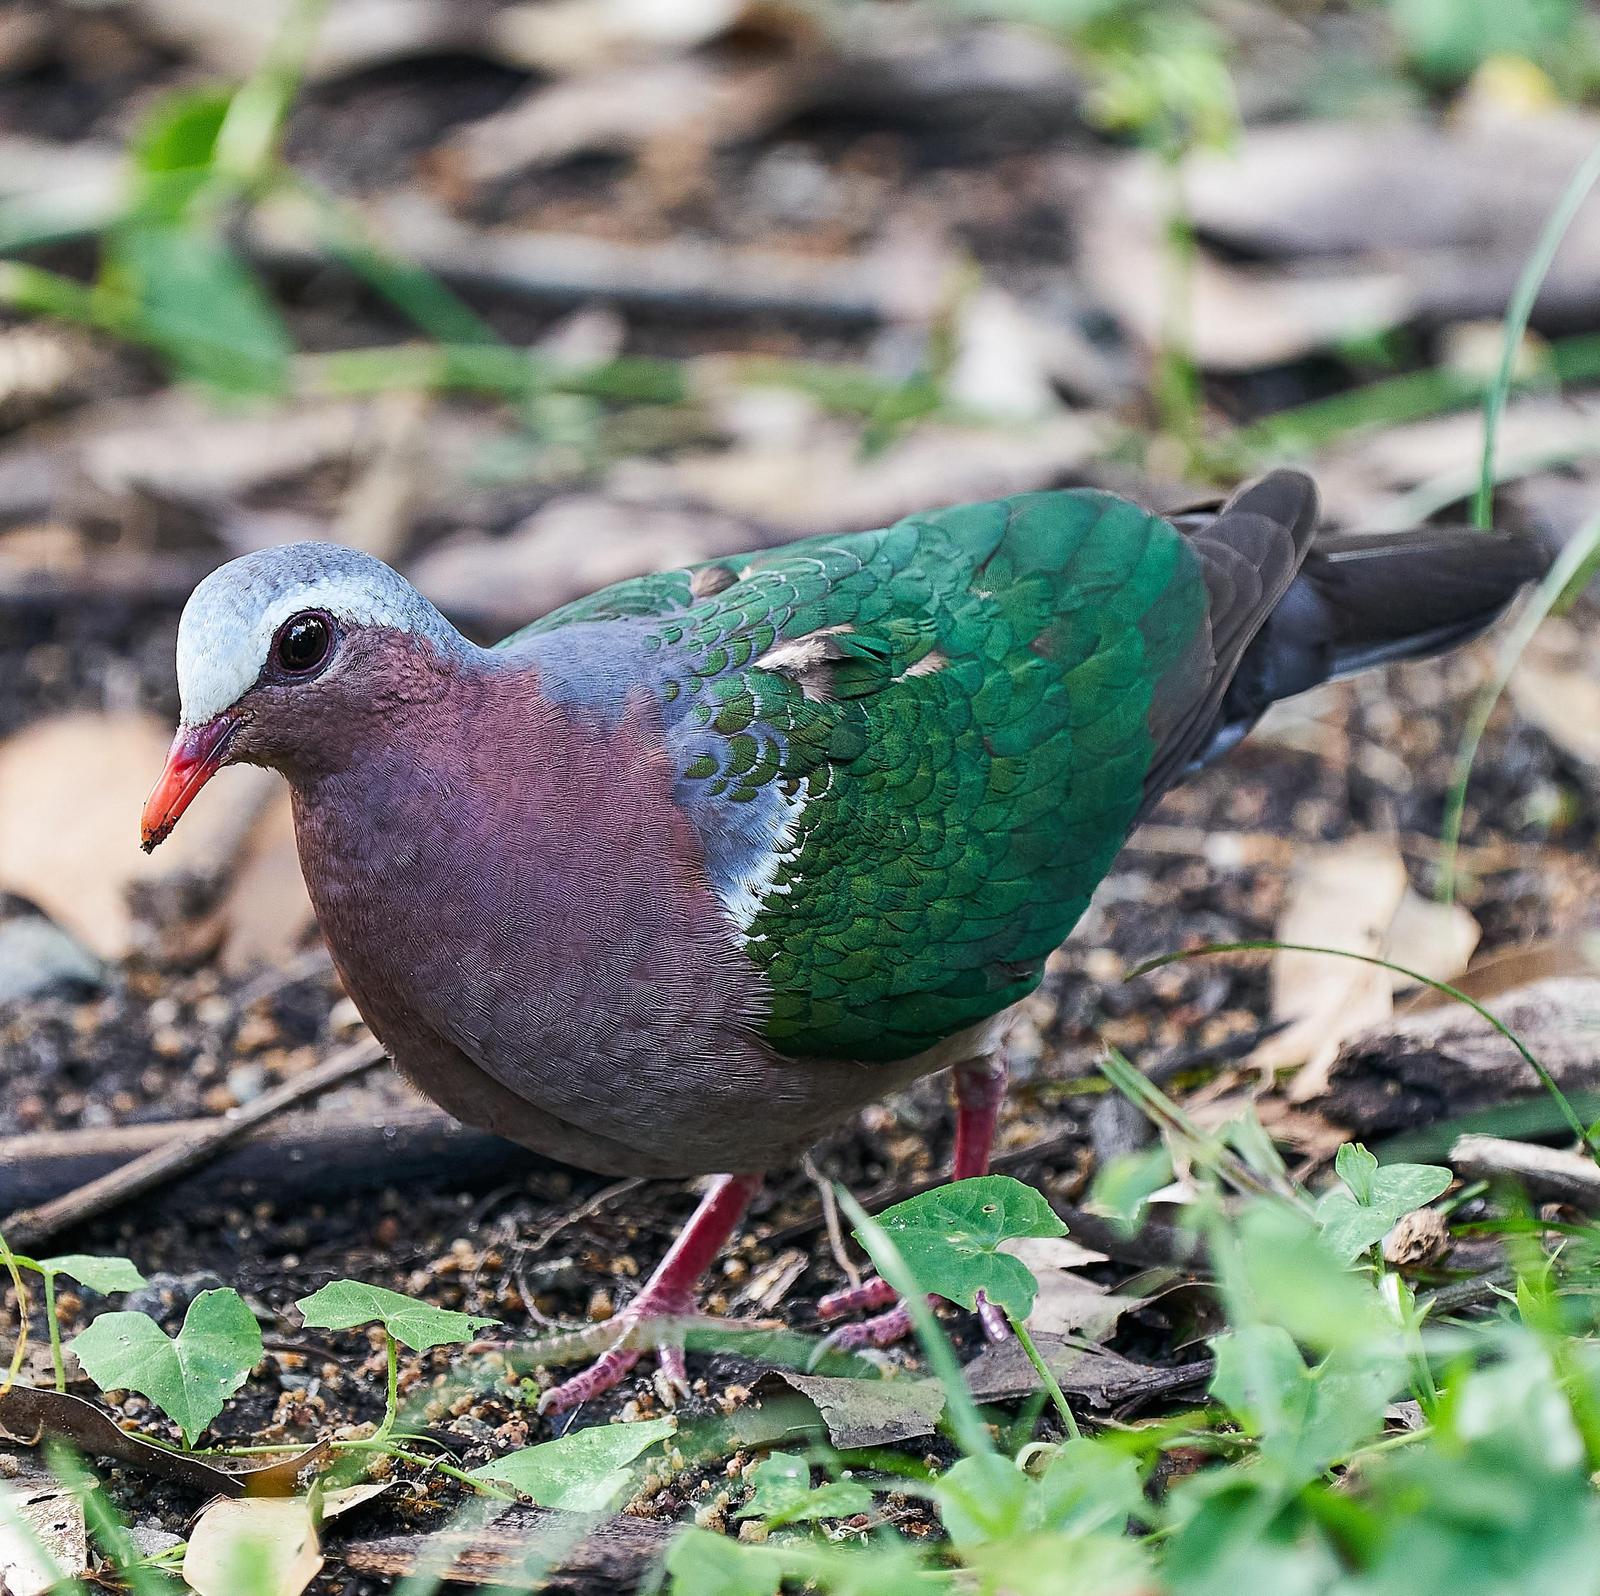 Asian Emerald Dove Photo by Steven Cheong